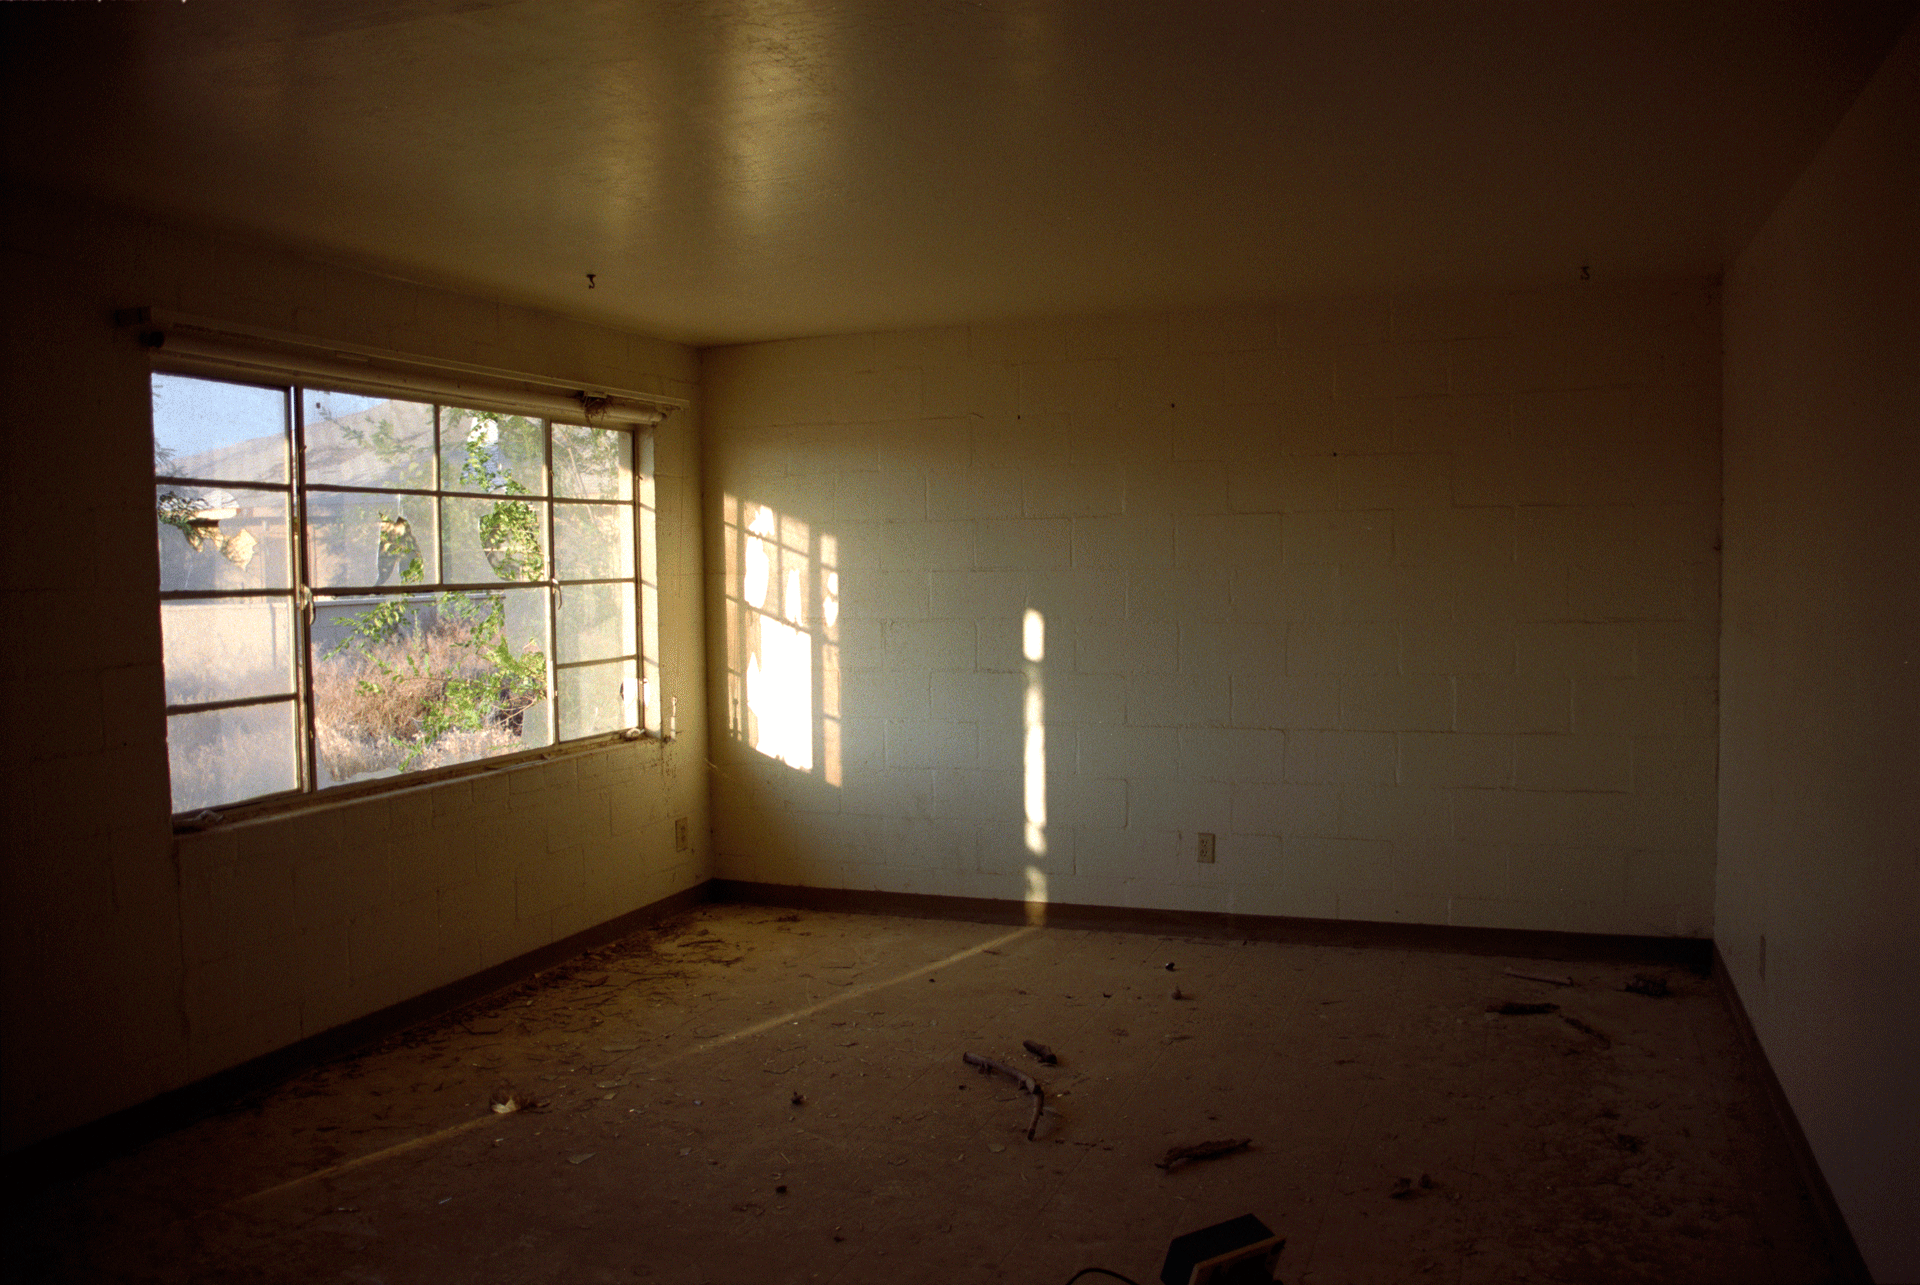 Decommissioned (Living Room)